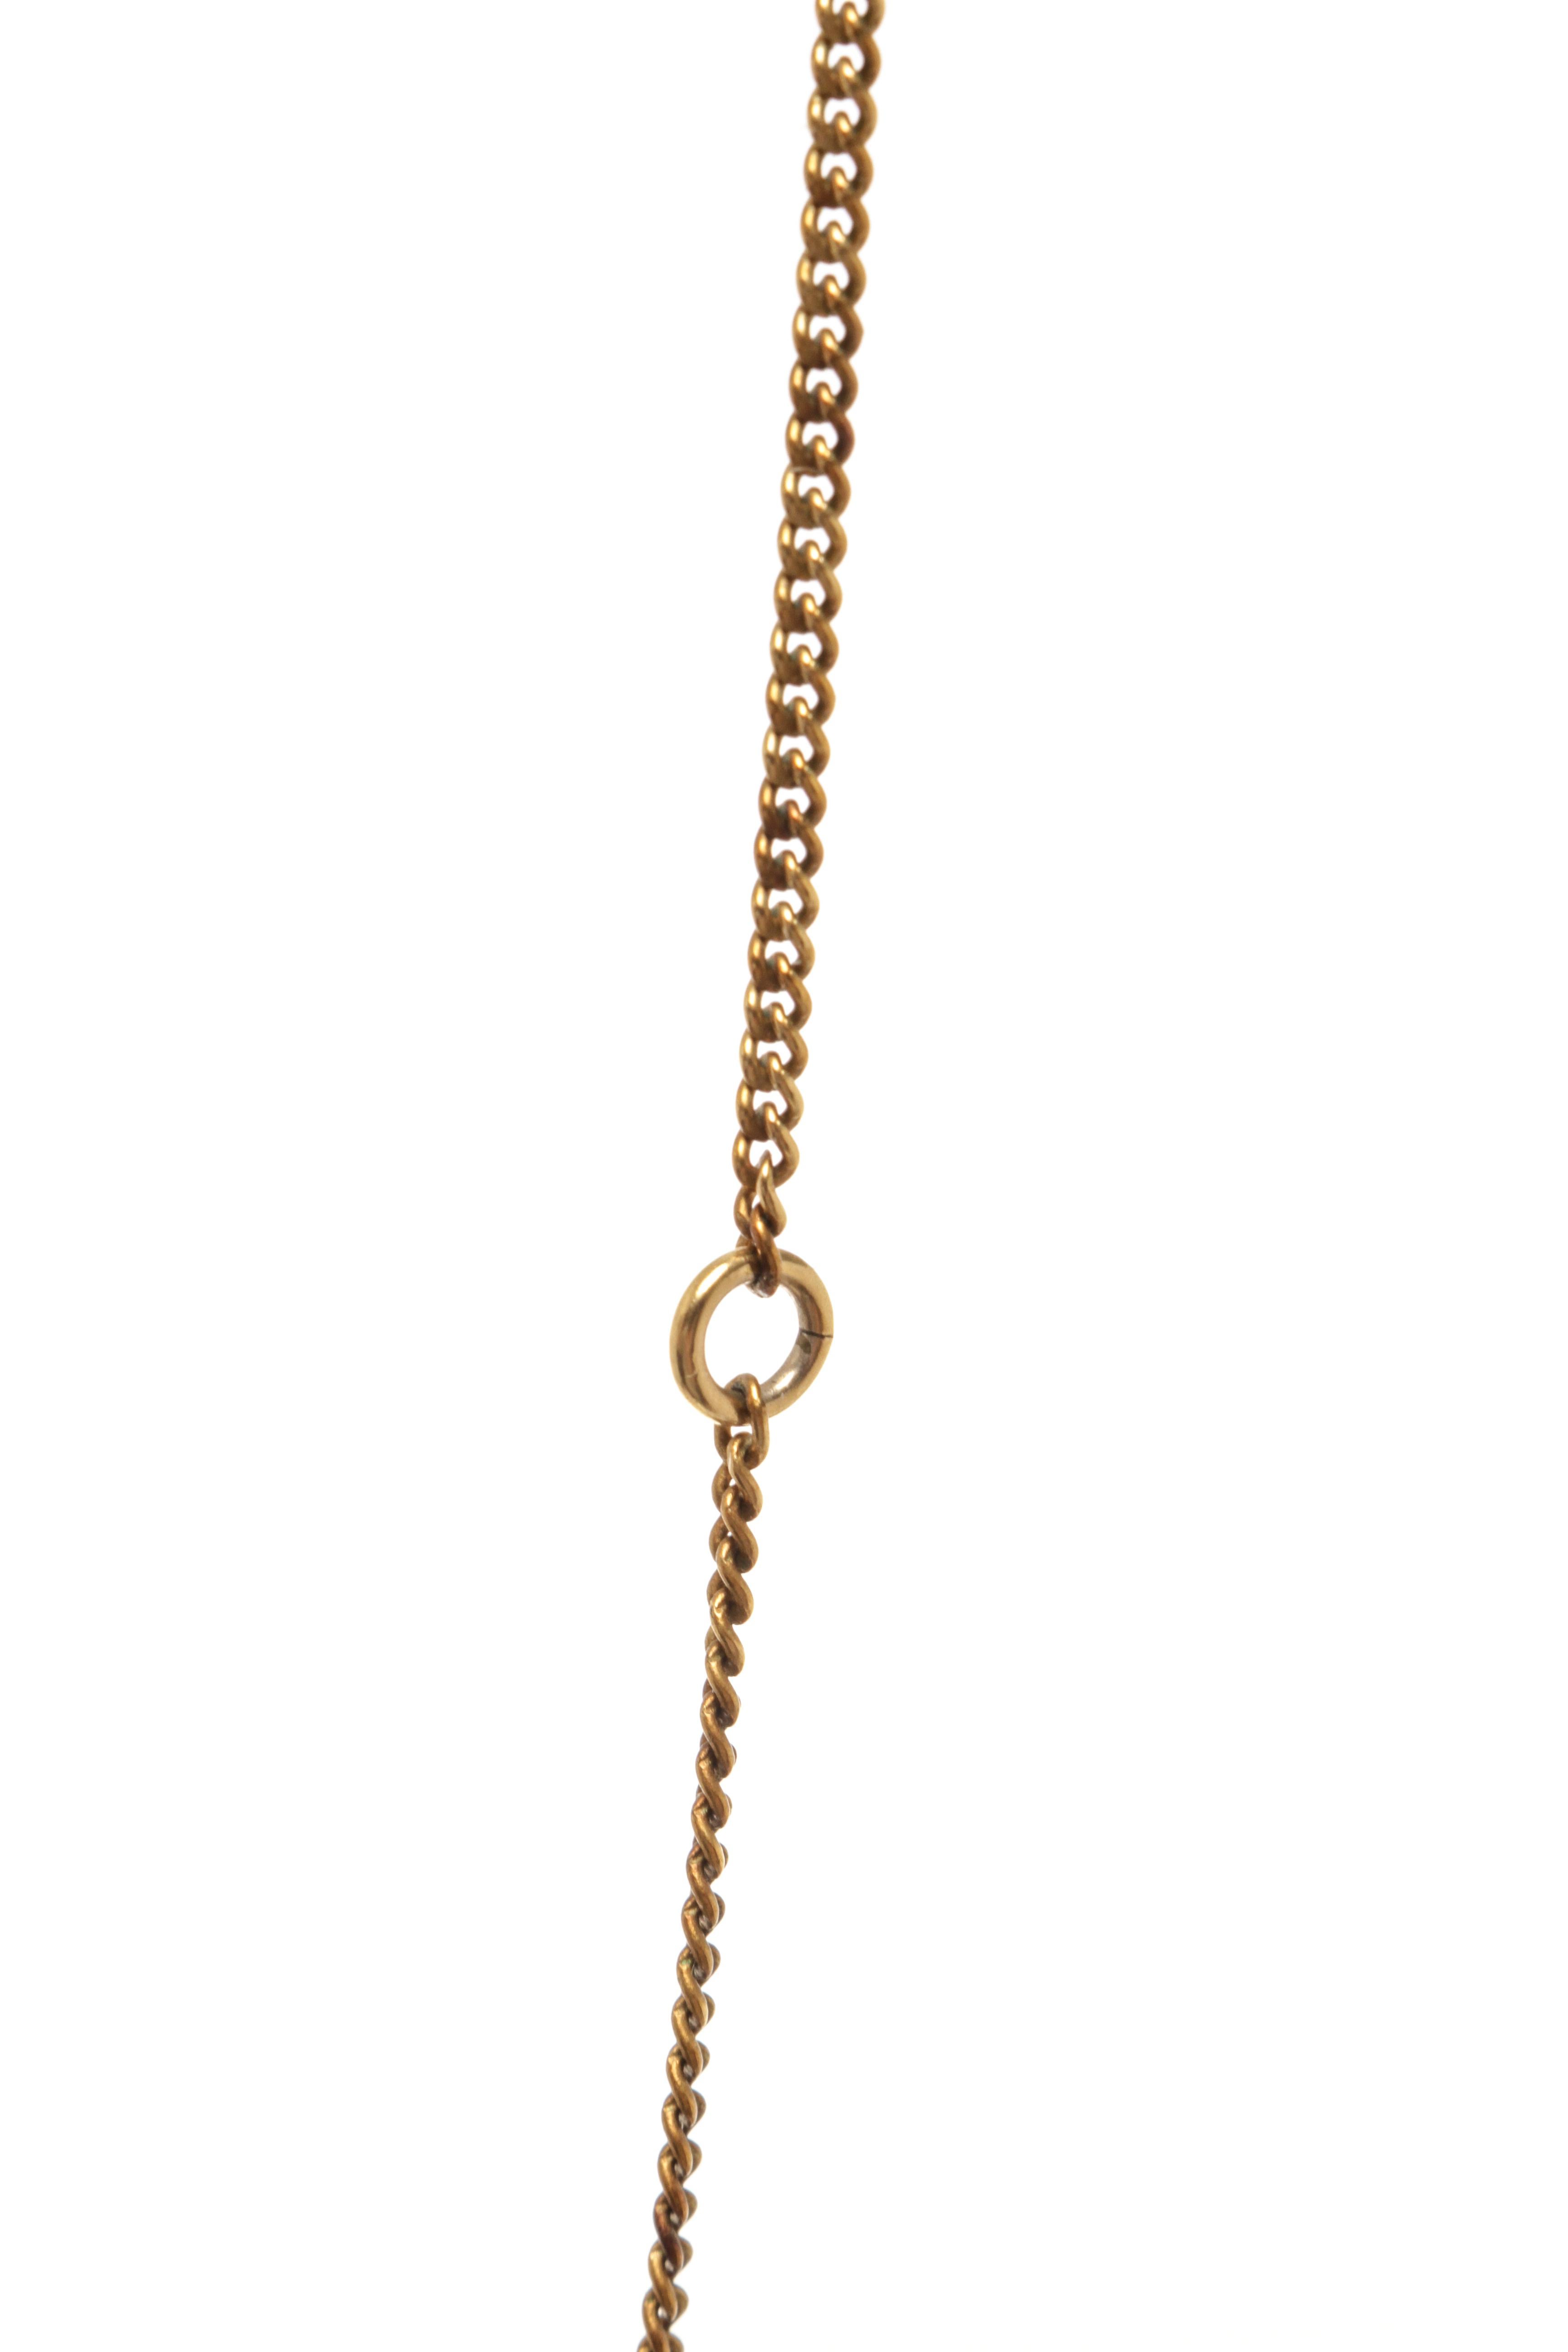 Chanel Gold Gem Long Necklace In Good Condition For Sale In Irvine, CA